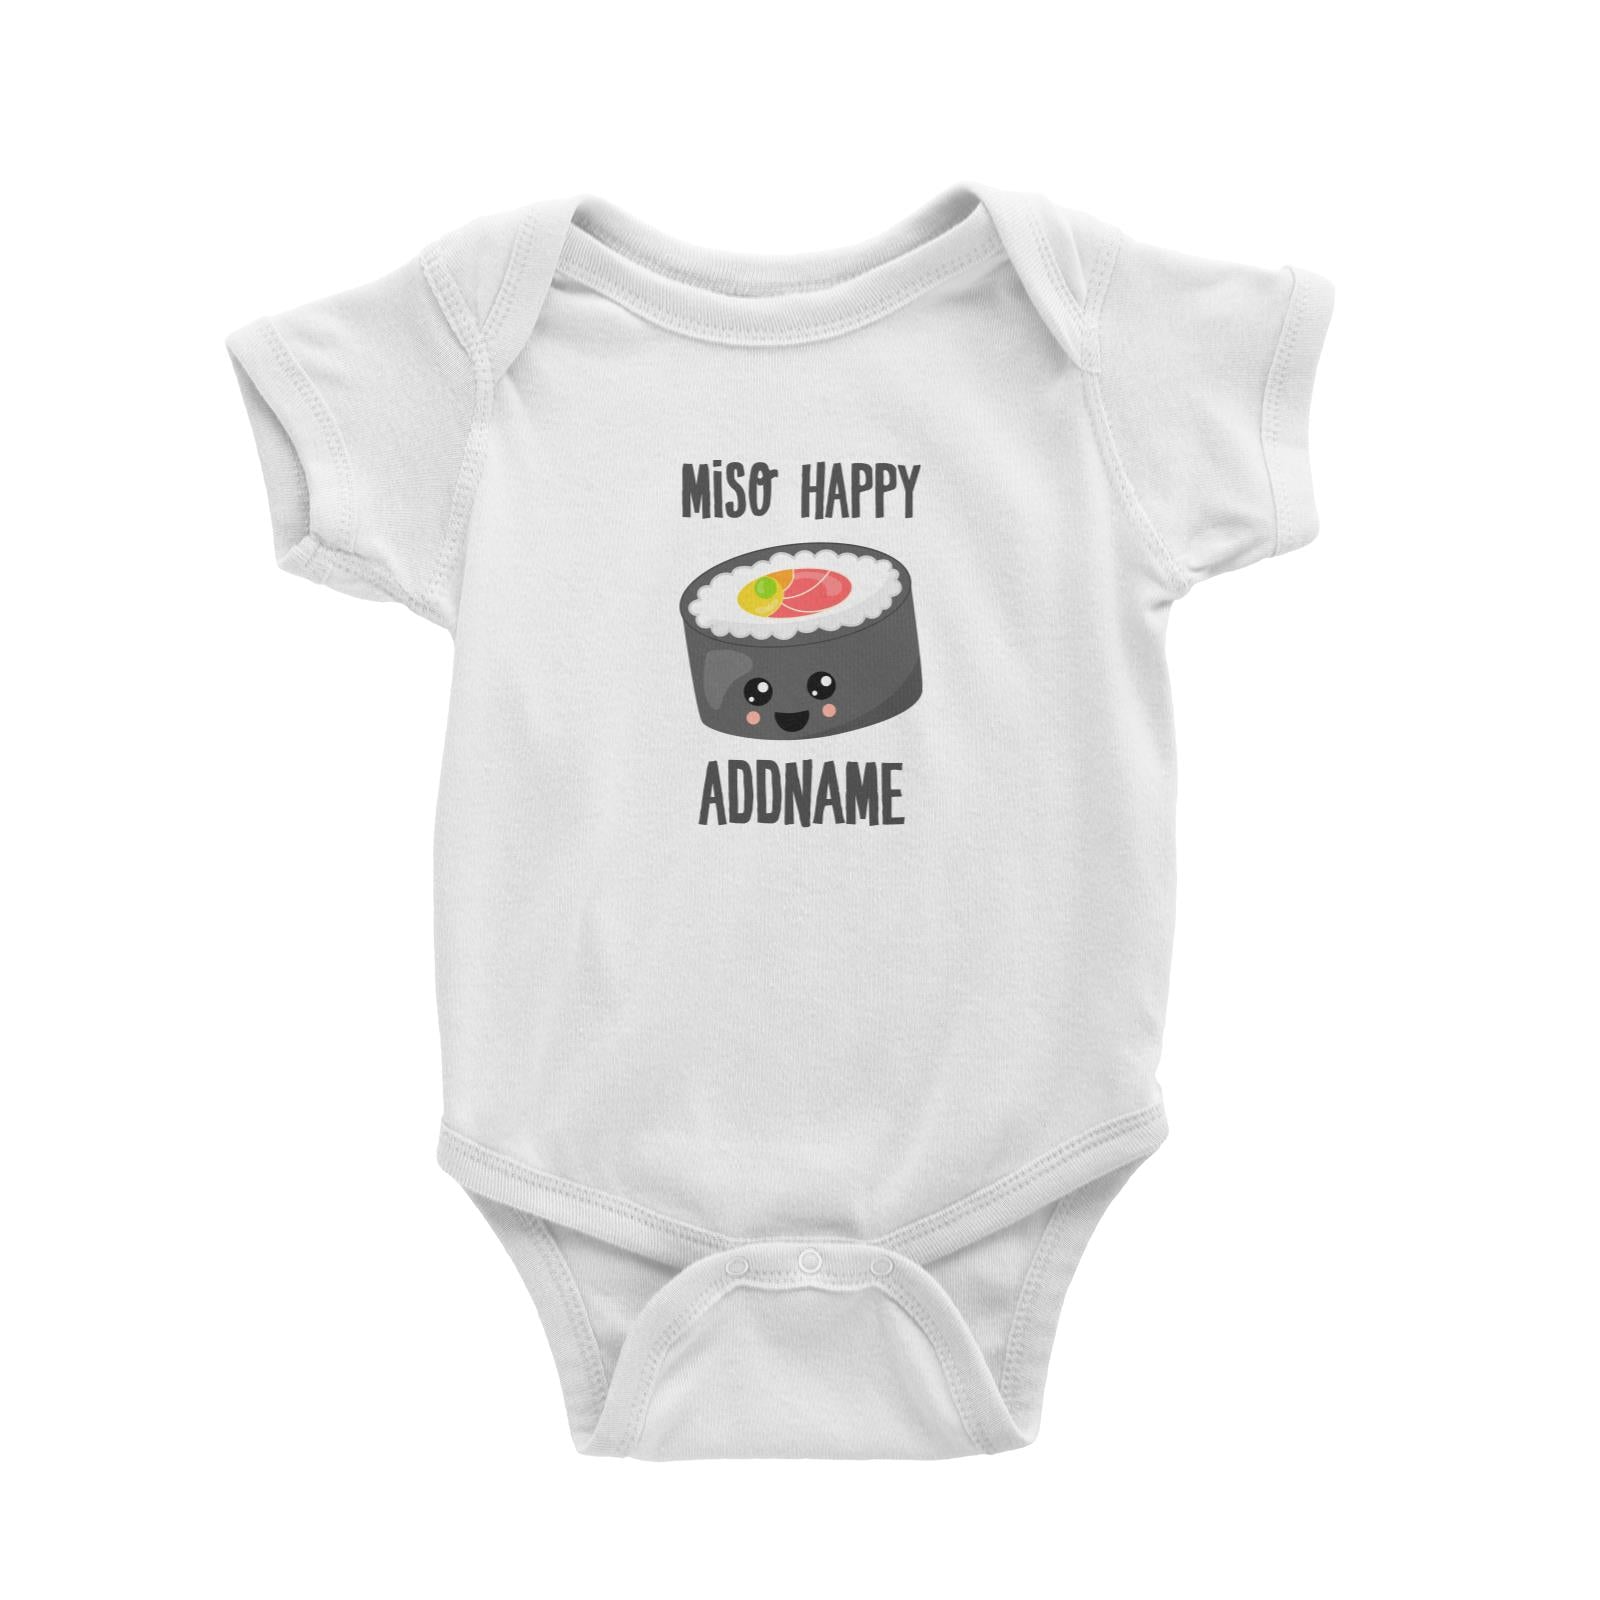 Miso Happy Sushi Circle Roll Addname White Baby Romper